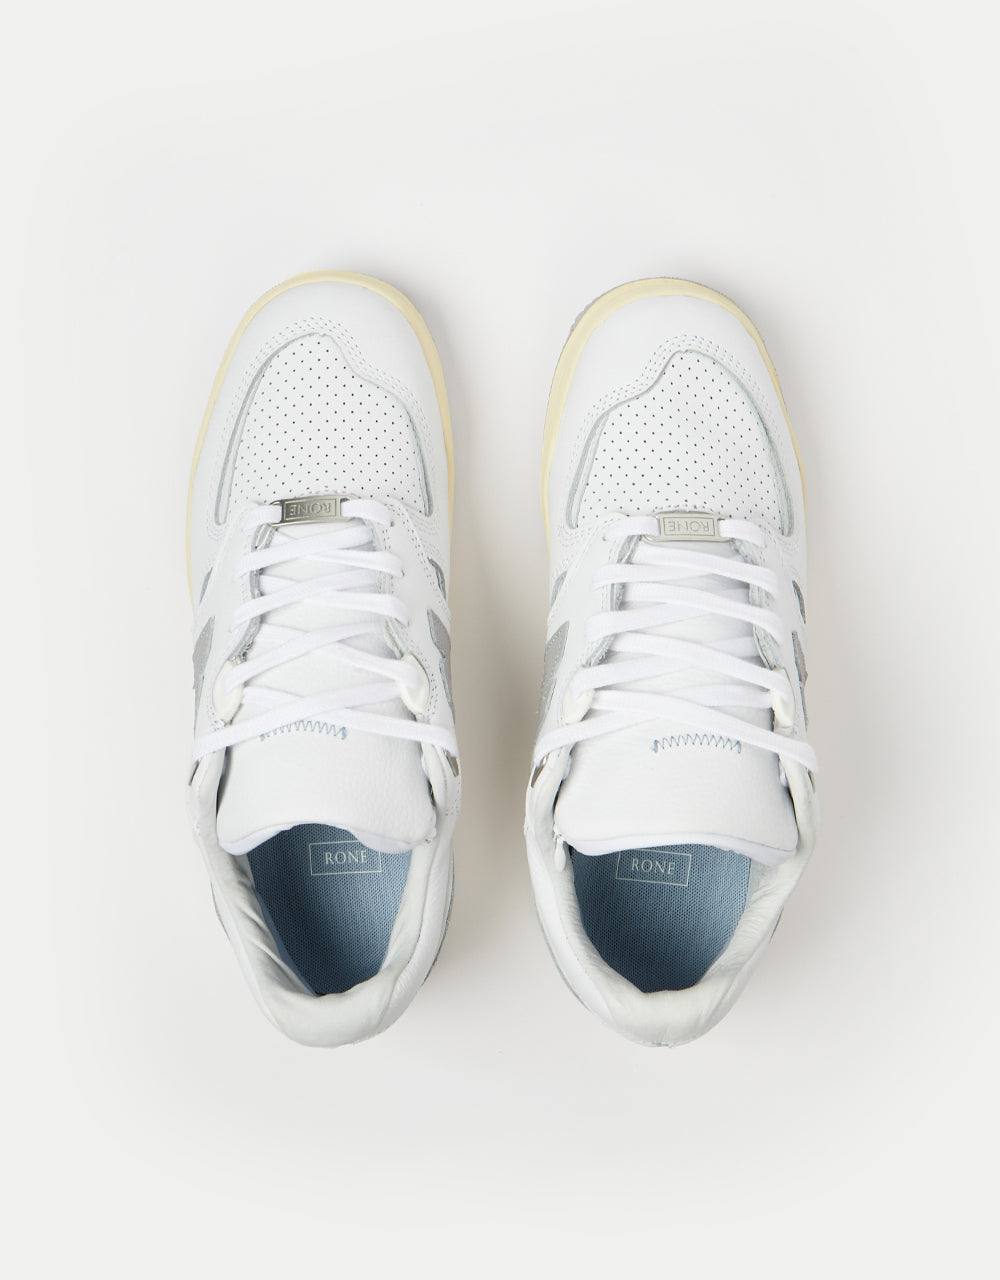 New Balance Numeric x Rone 1010 Skate Shoes - White